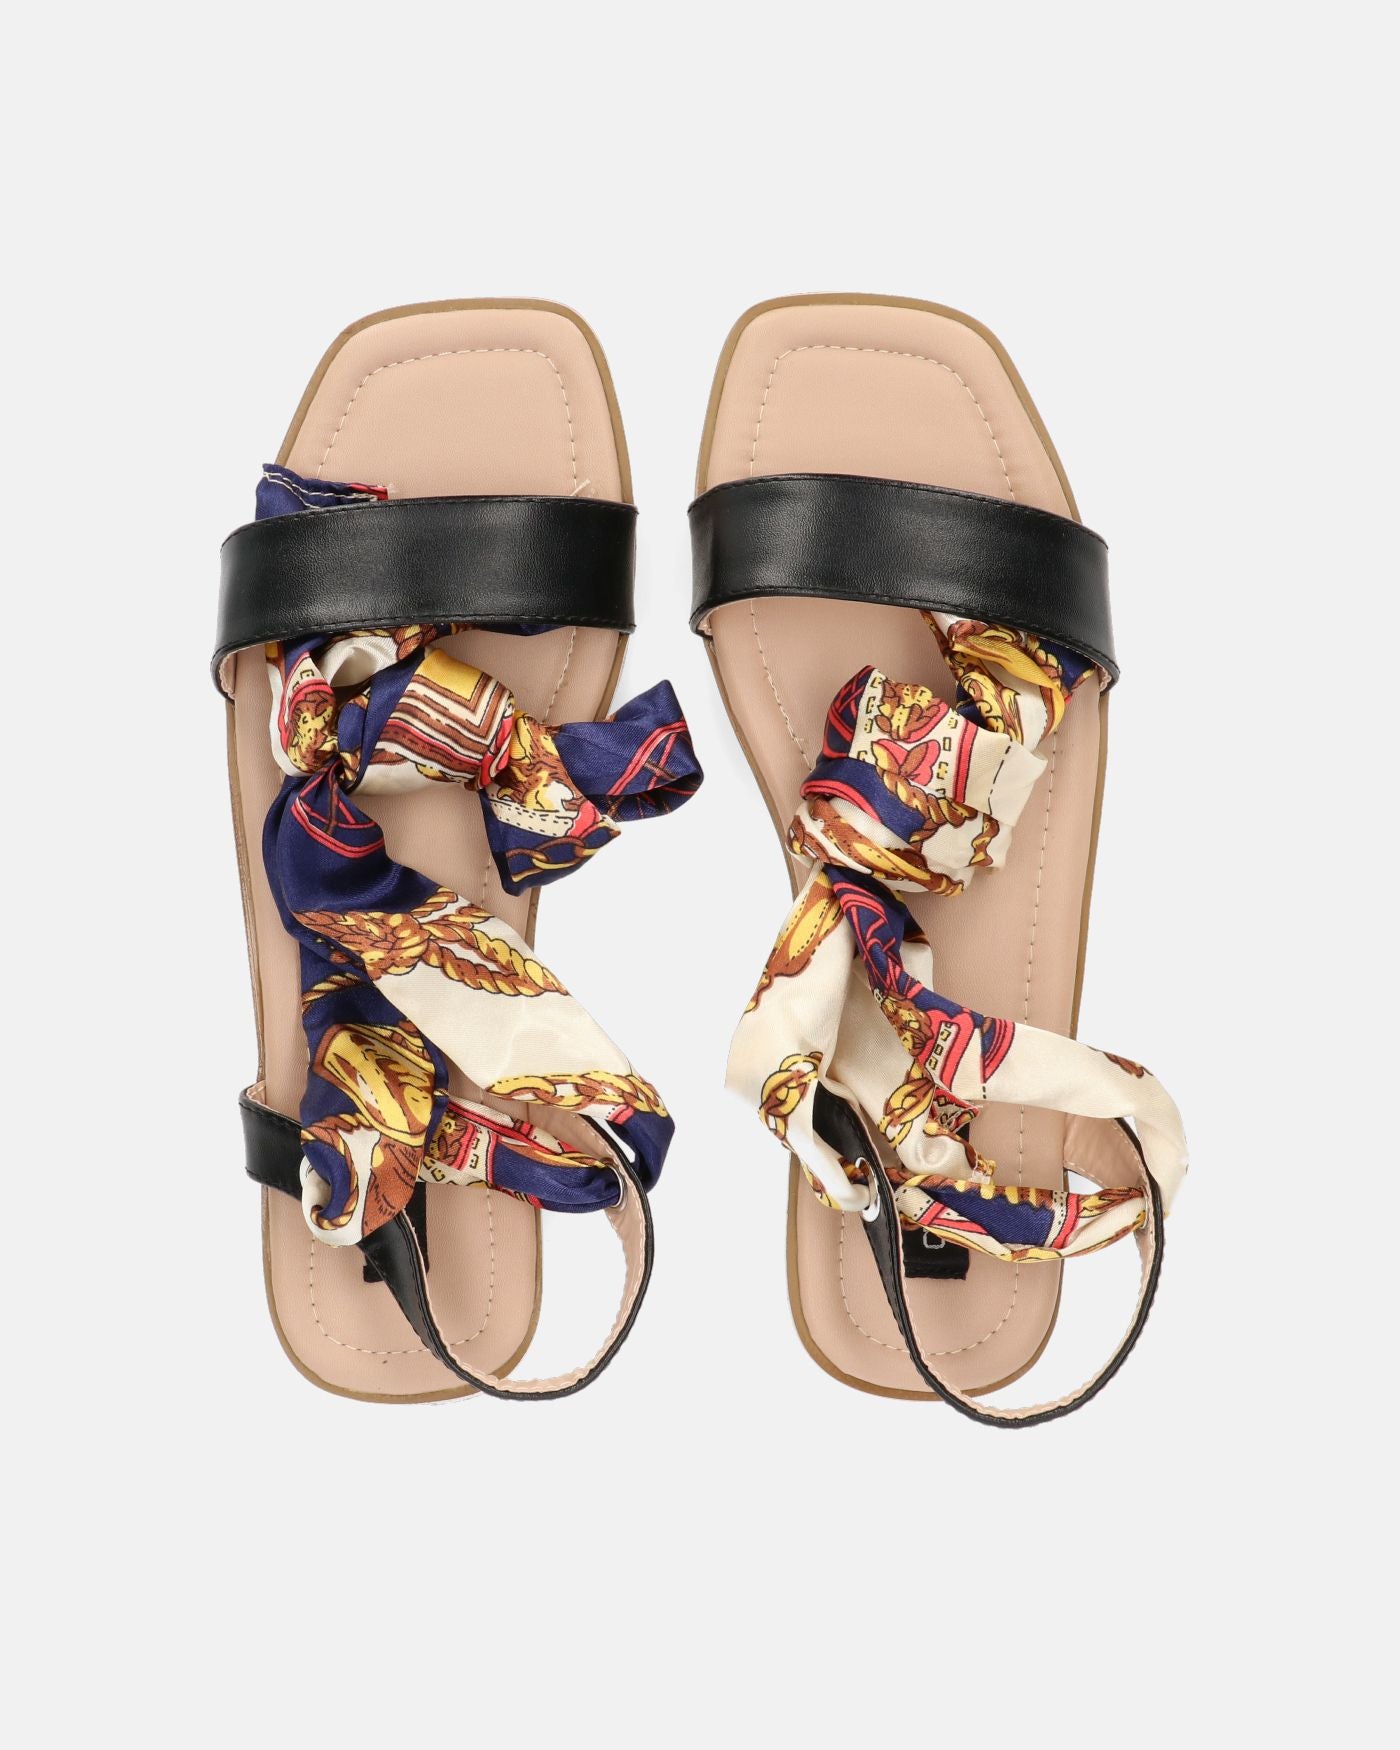 ARIANA - black sandals with foulard style laces